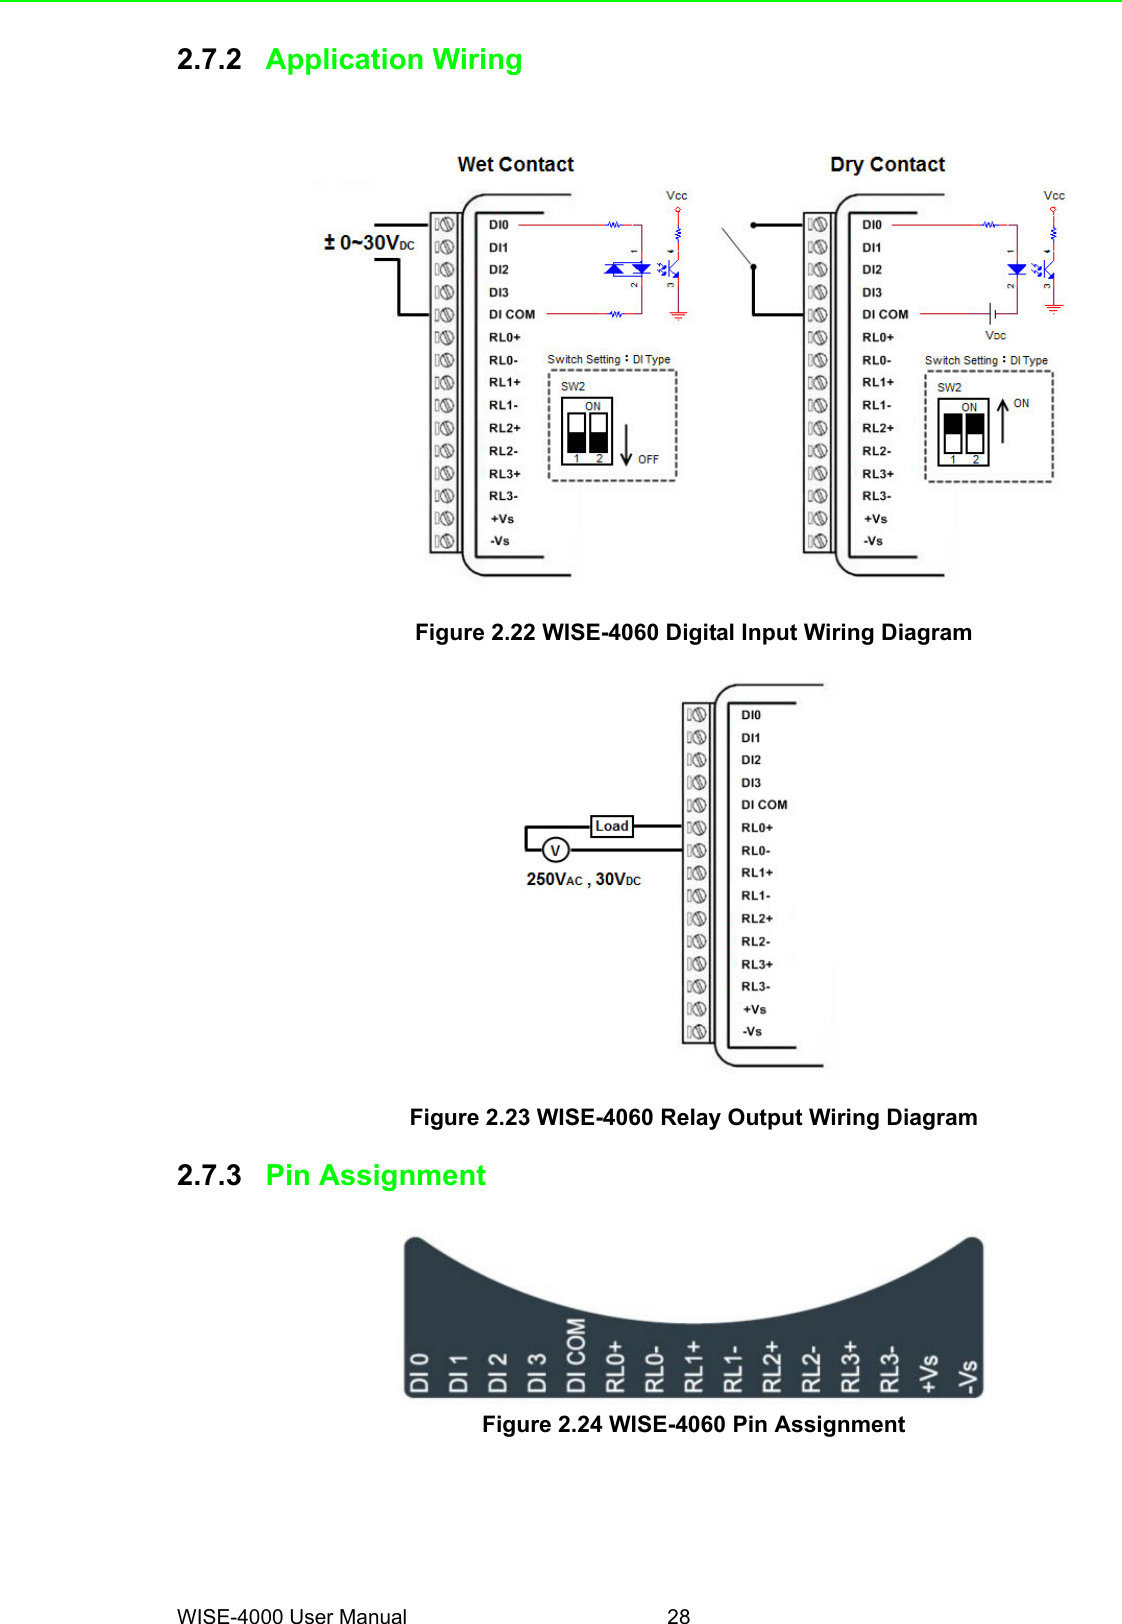 WISE-4000 User Manual 282.7.2 Application WiringFigure 2.22 WISE-4060 Digital Input Wiring DiagramFigure 2.23 WISE-4060 Relay Output Wiring Diagram2.7.3 Pin AssignmentFigure 2.24 WISE-4060 Pin Assignment